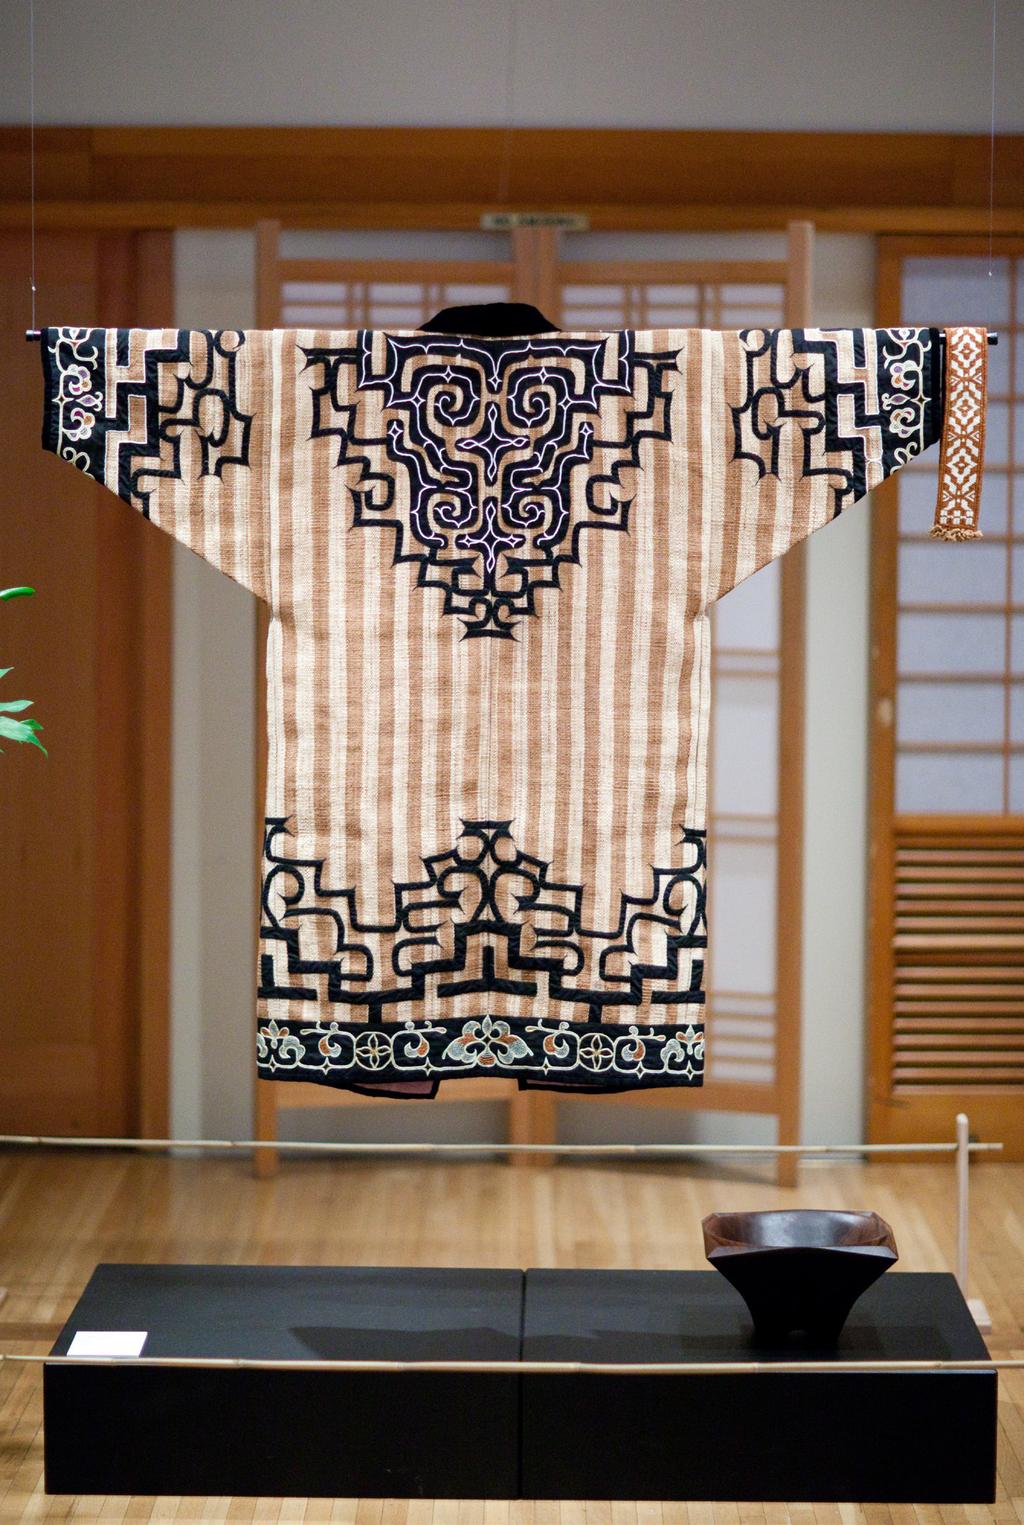 ceremonial robes which explored the parallels between our two regions that go back to ancient times to the first people who